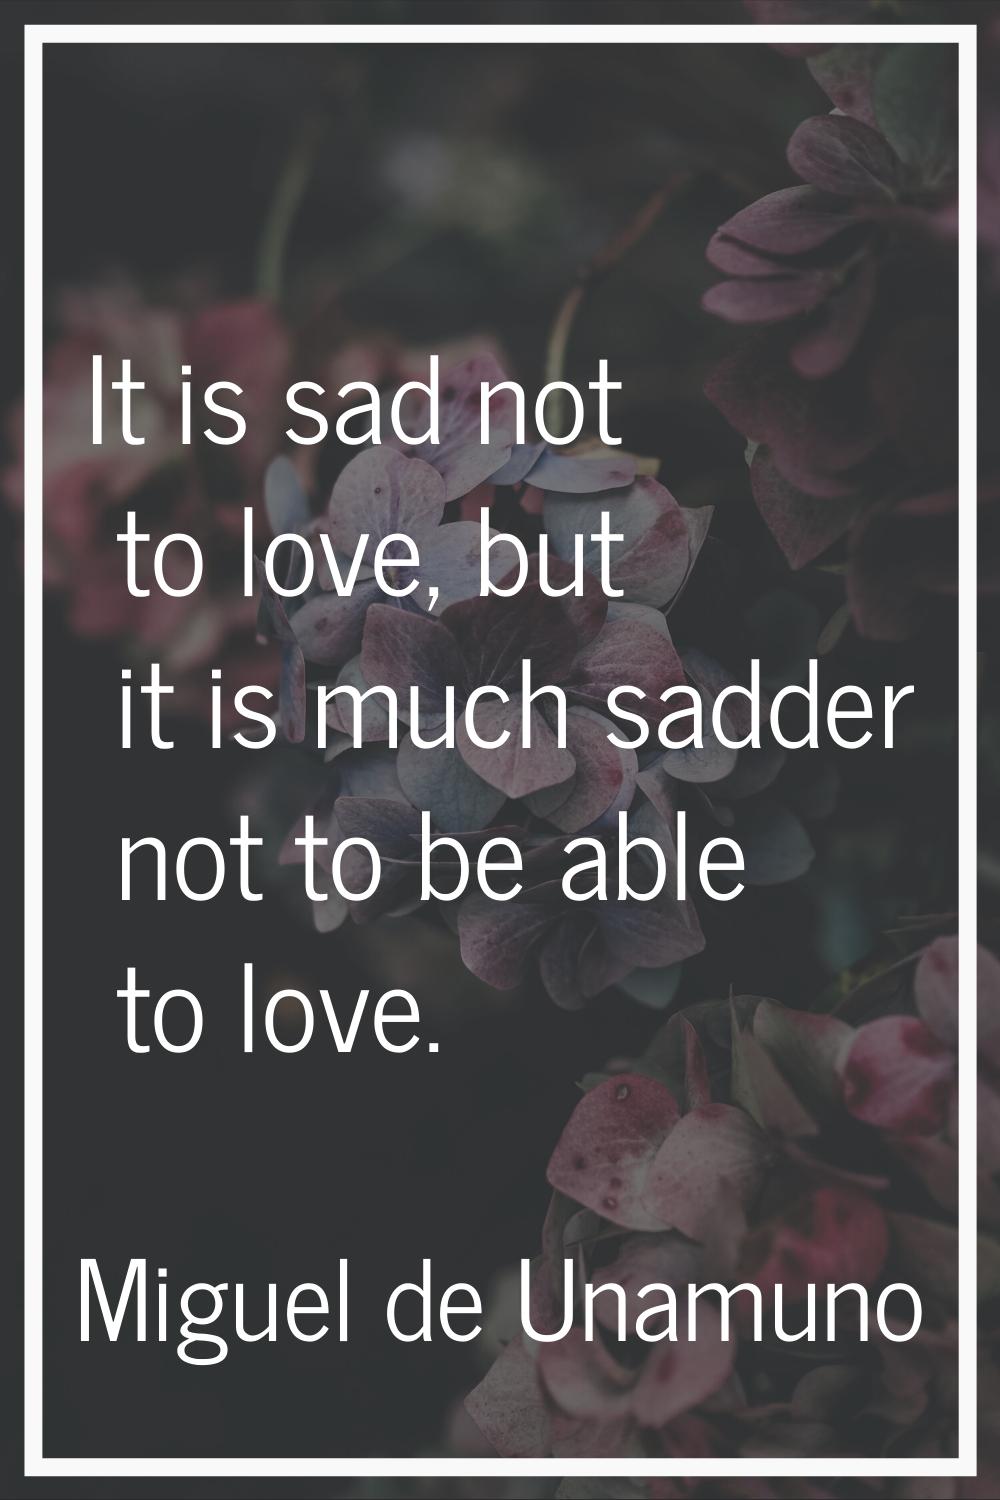 It is sad not to love, but it is much sadder not to be able to love.